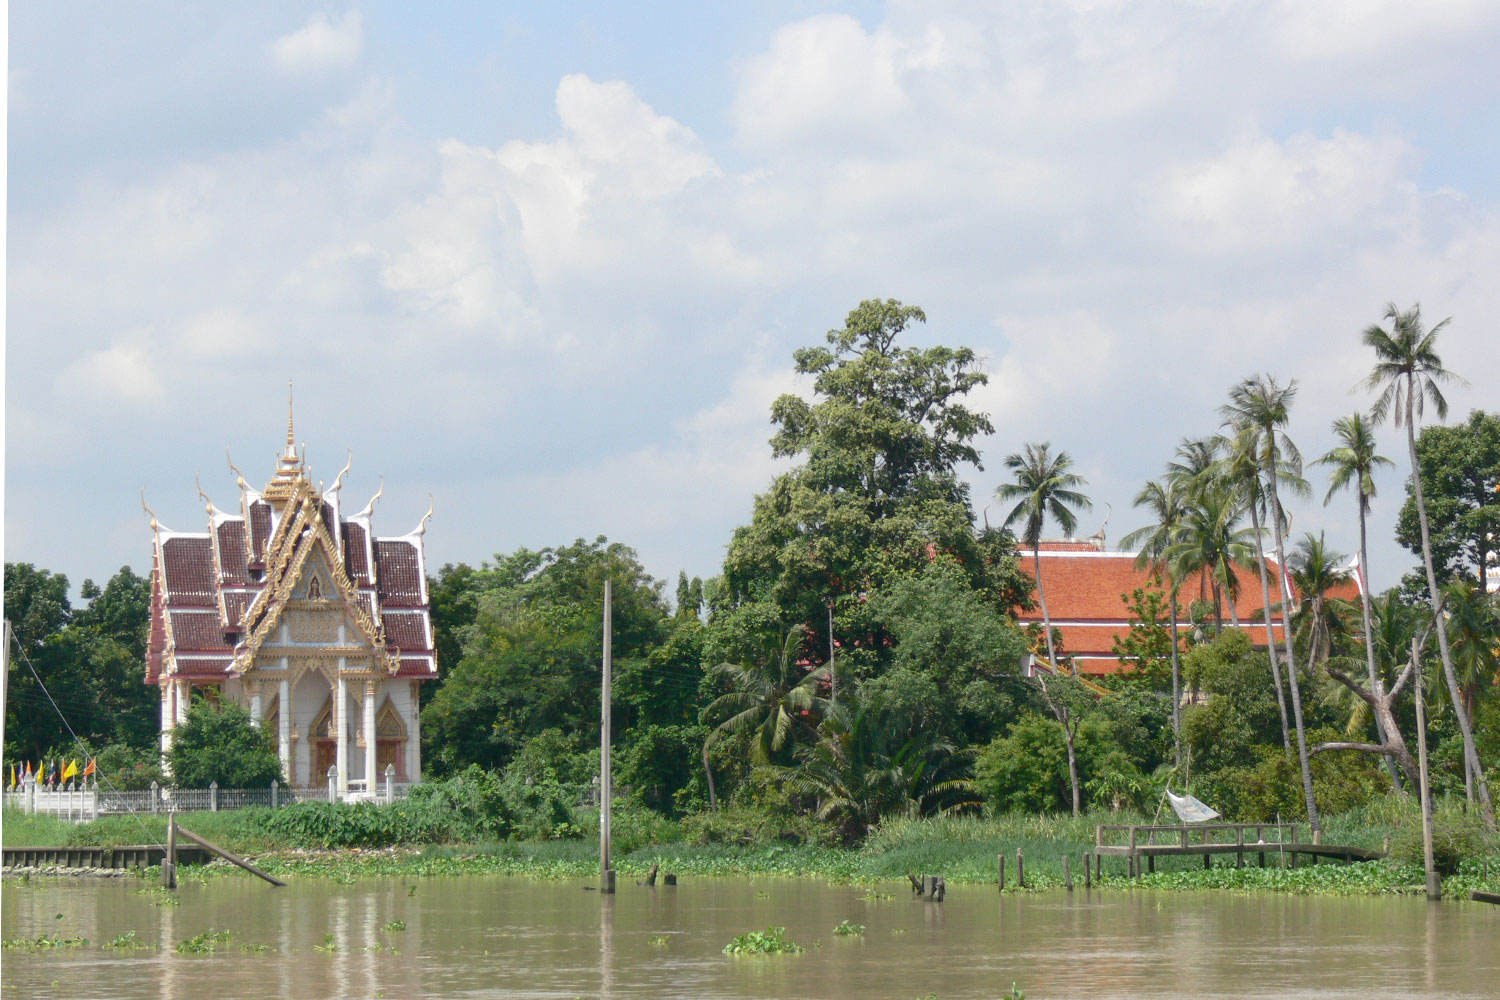 View of the river banks on the Chao Phraya River